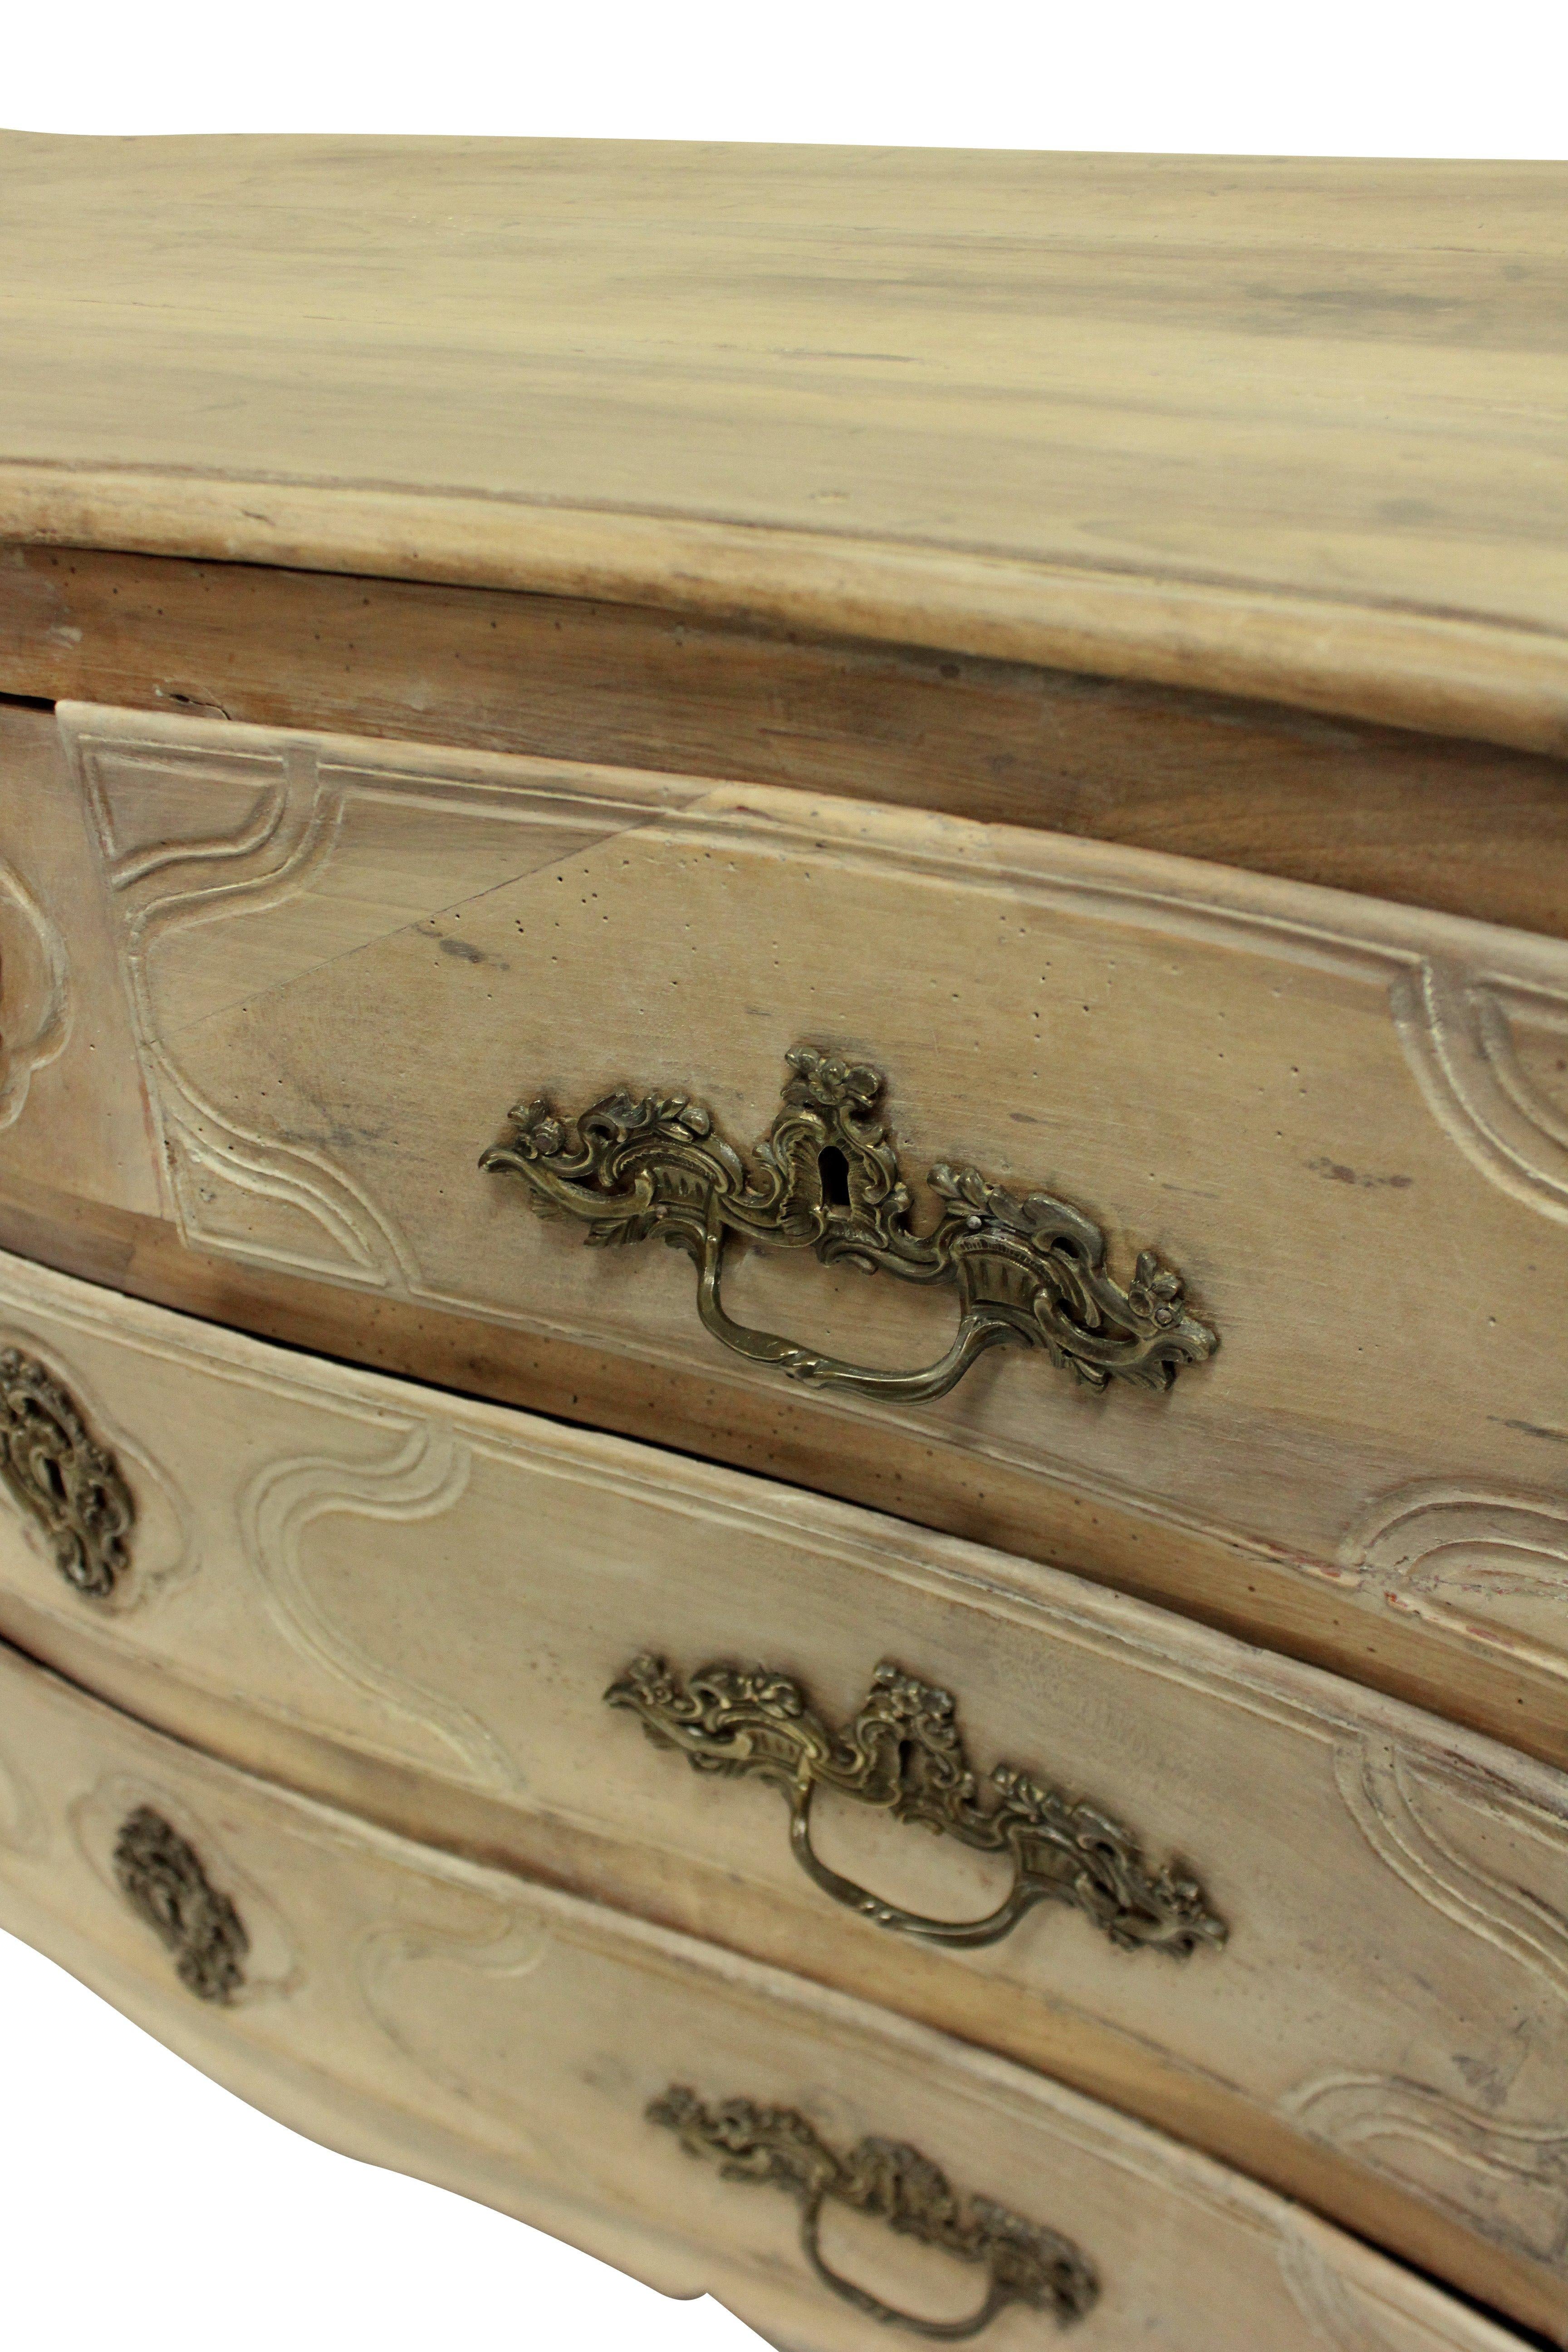 A pickled 18th century French Louis XV walnut commode, with serpentine front and five drawers. The original handles in bronze. Pickling was a popular trend in the 1920s-1930s.